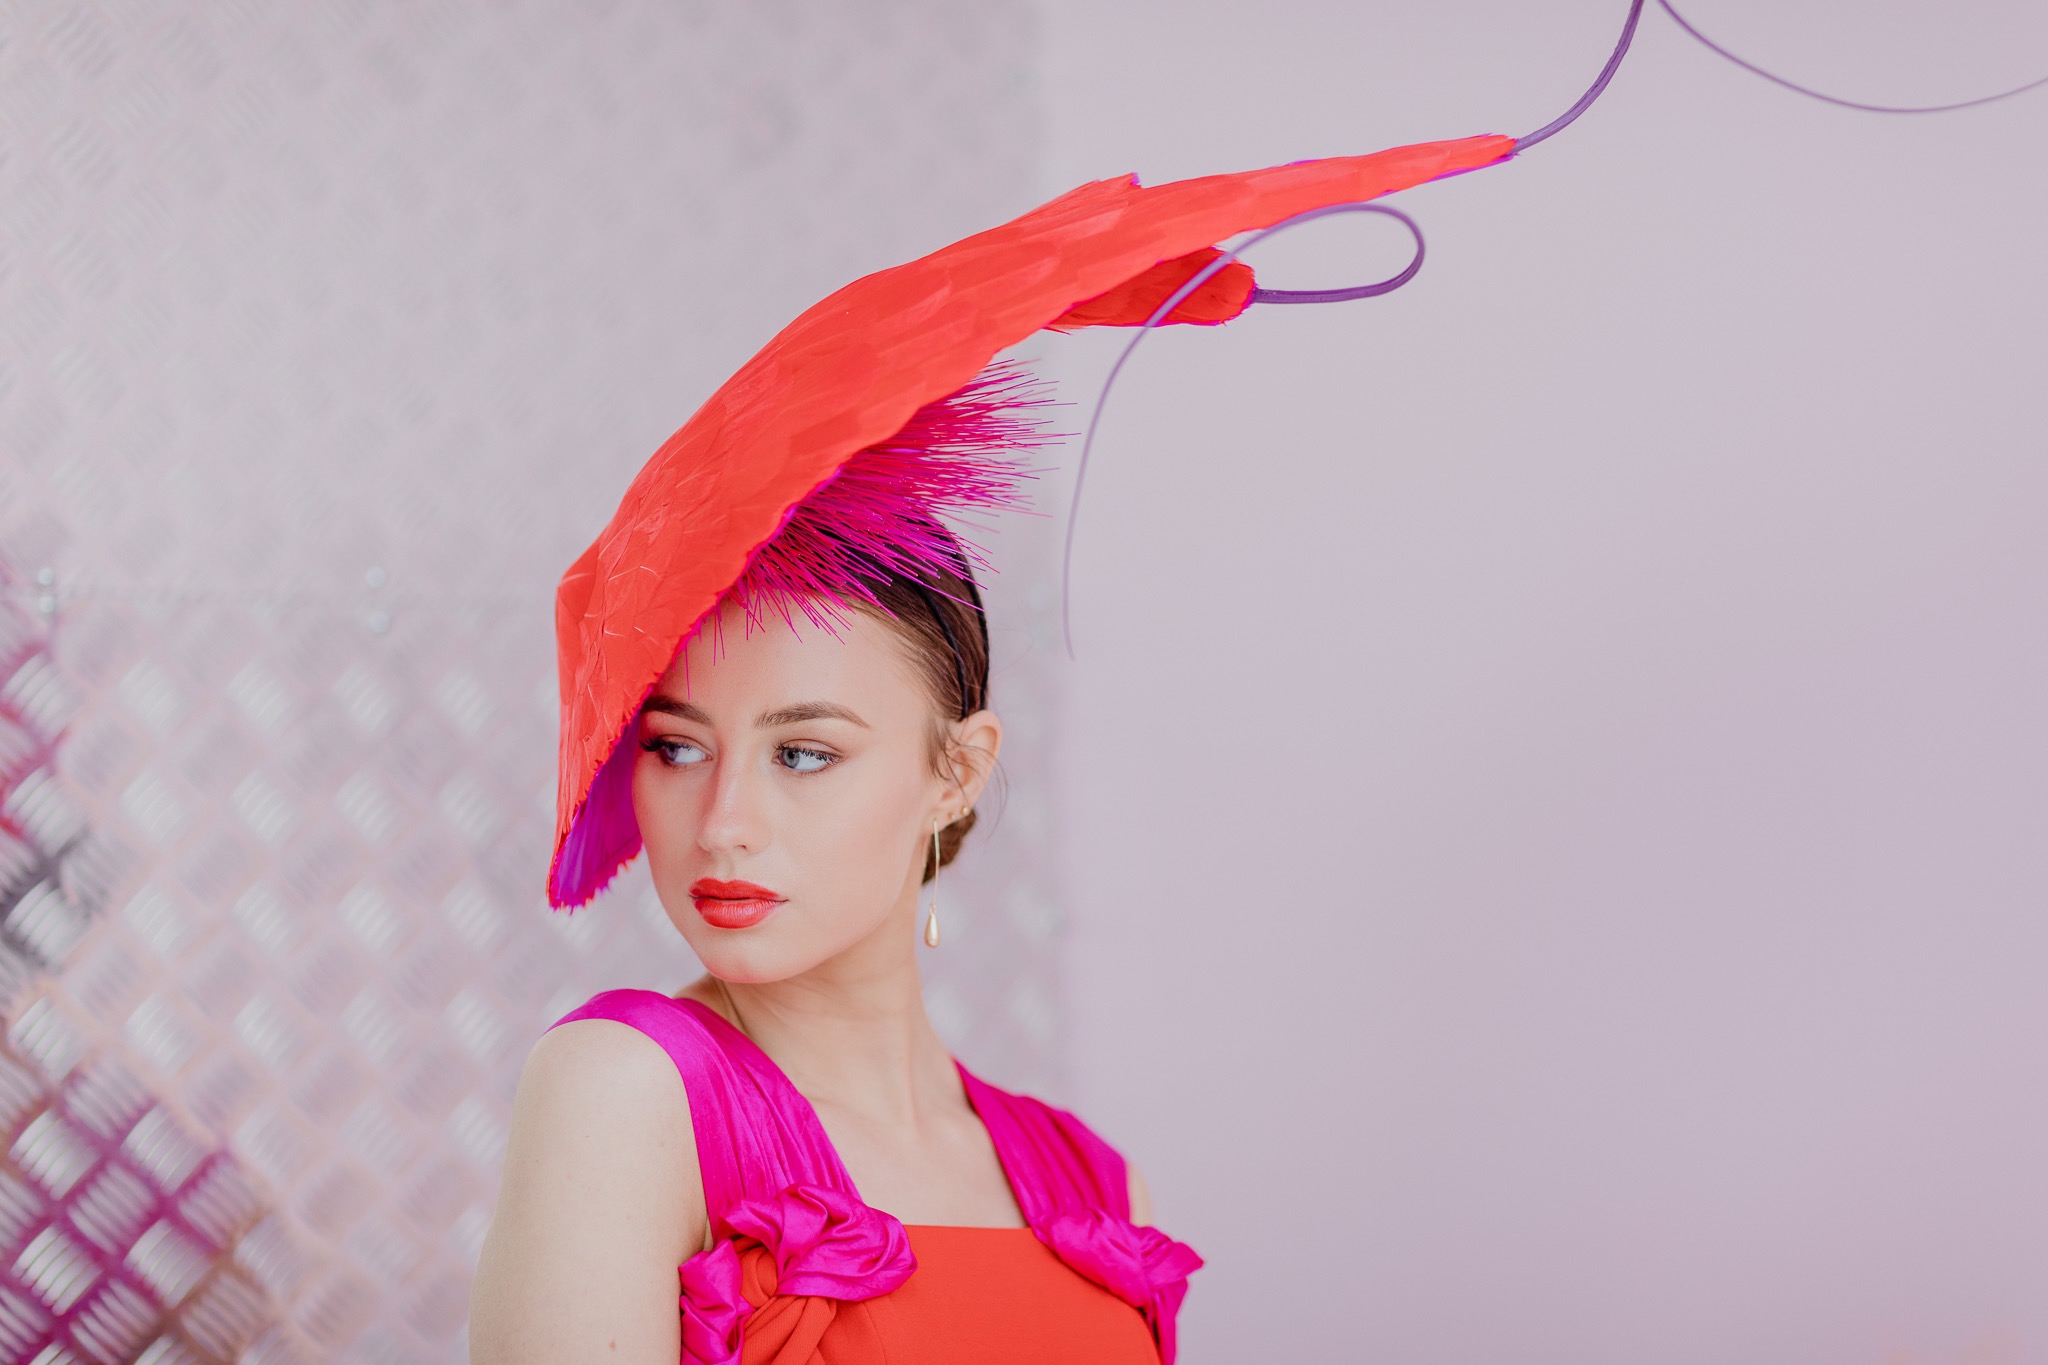 Simply irresistible: milliner's tale a heady mix of art and fashion